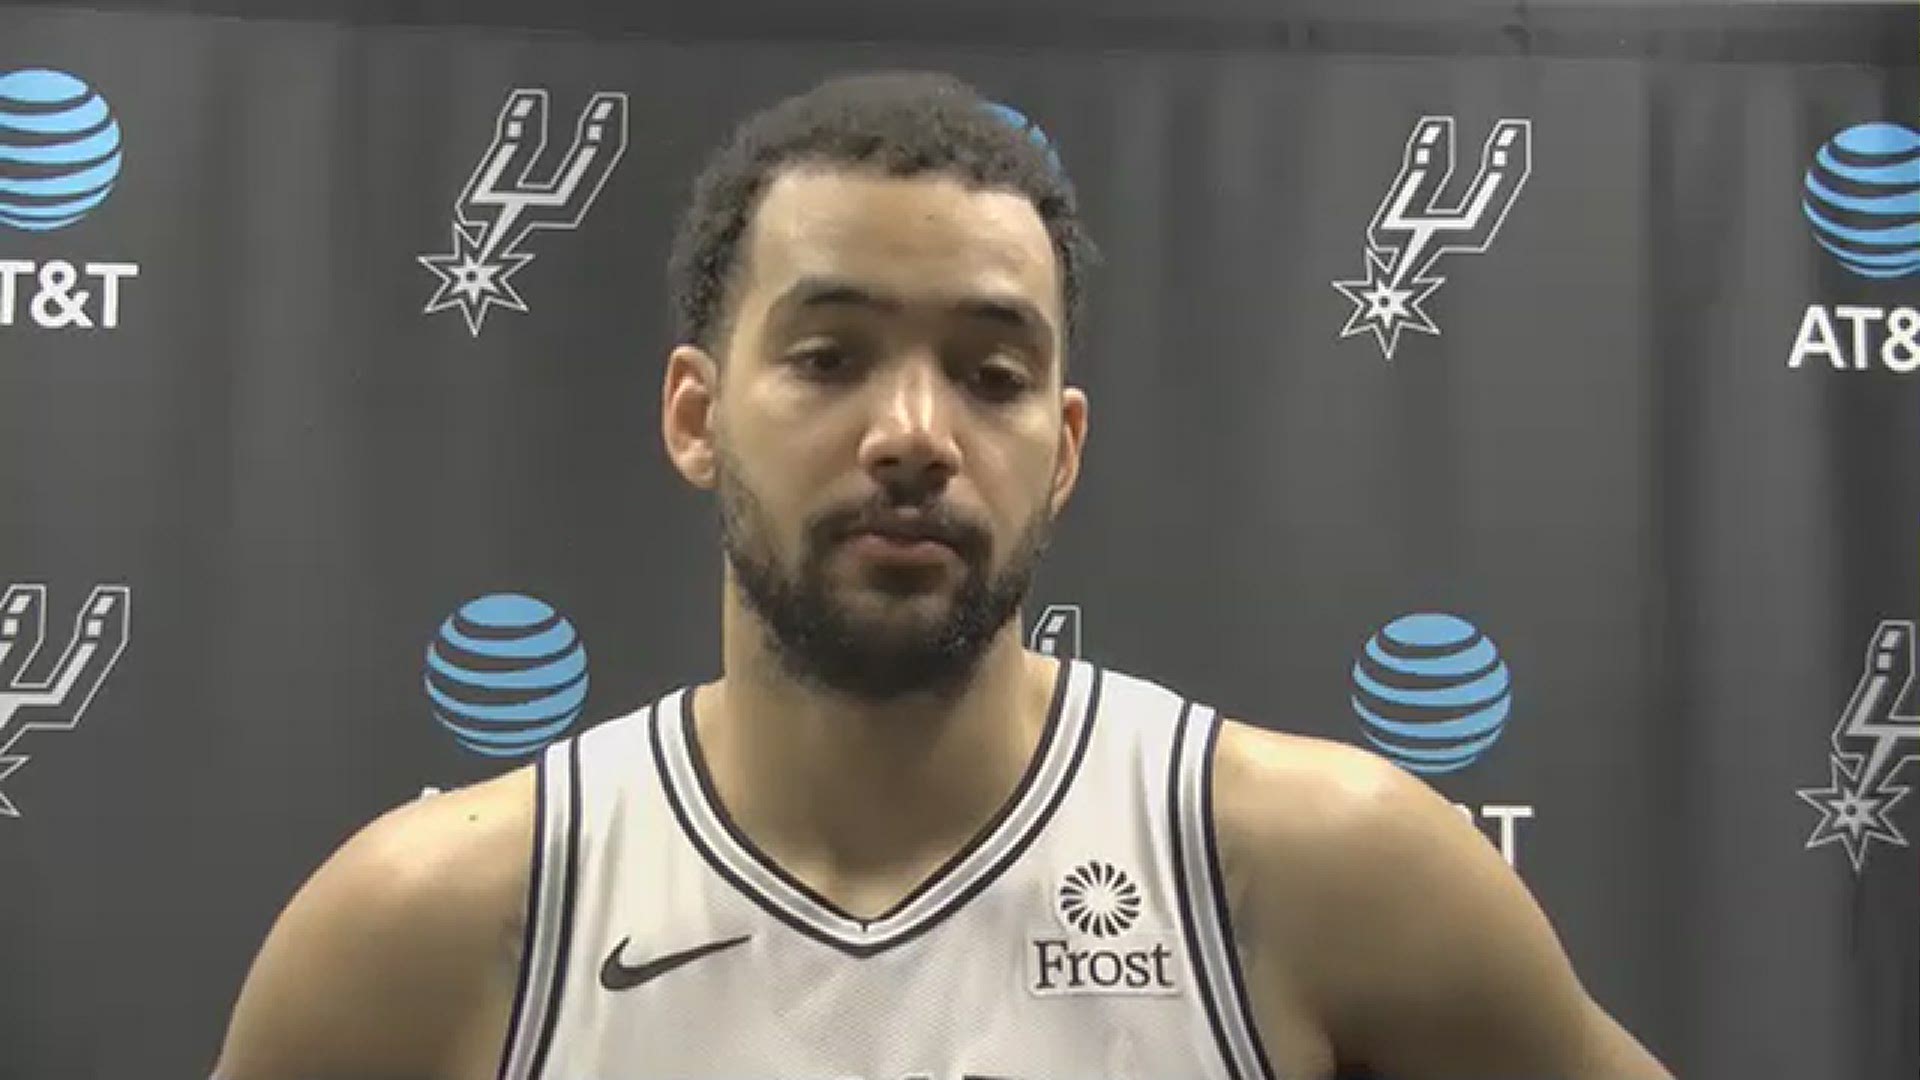 Lyles spoke about how the Spurs broke through in the second half, and what it's like to attack off of setups from DeMar DeRozan and Trey Lyles.